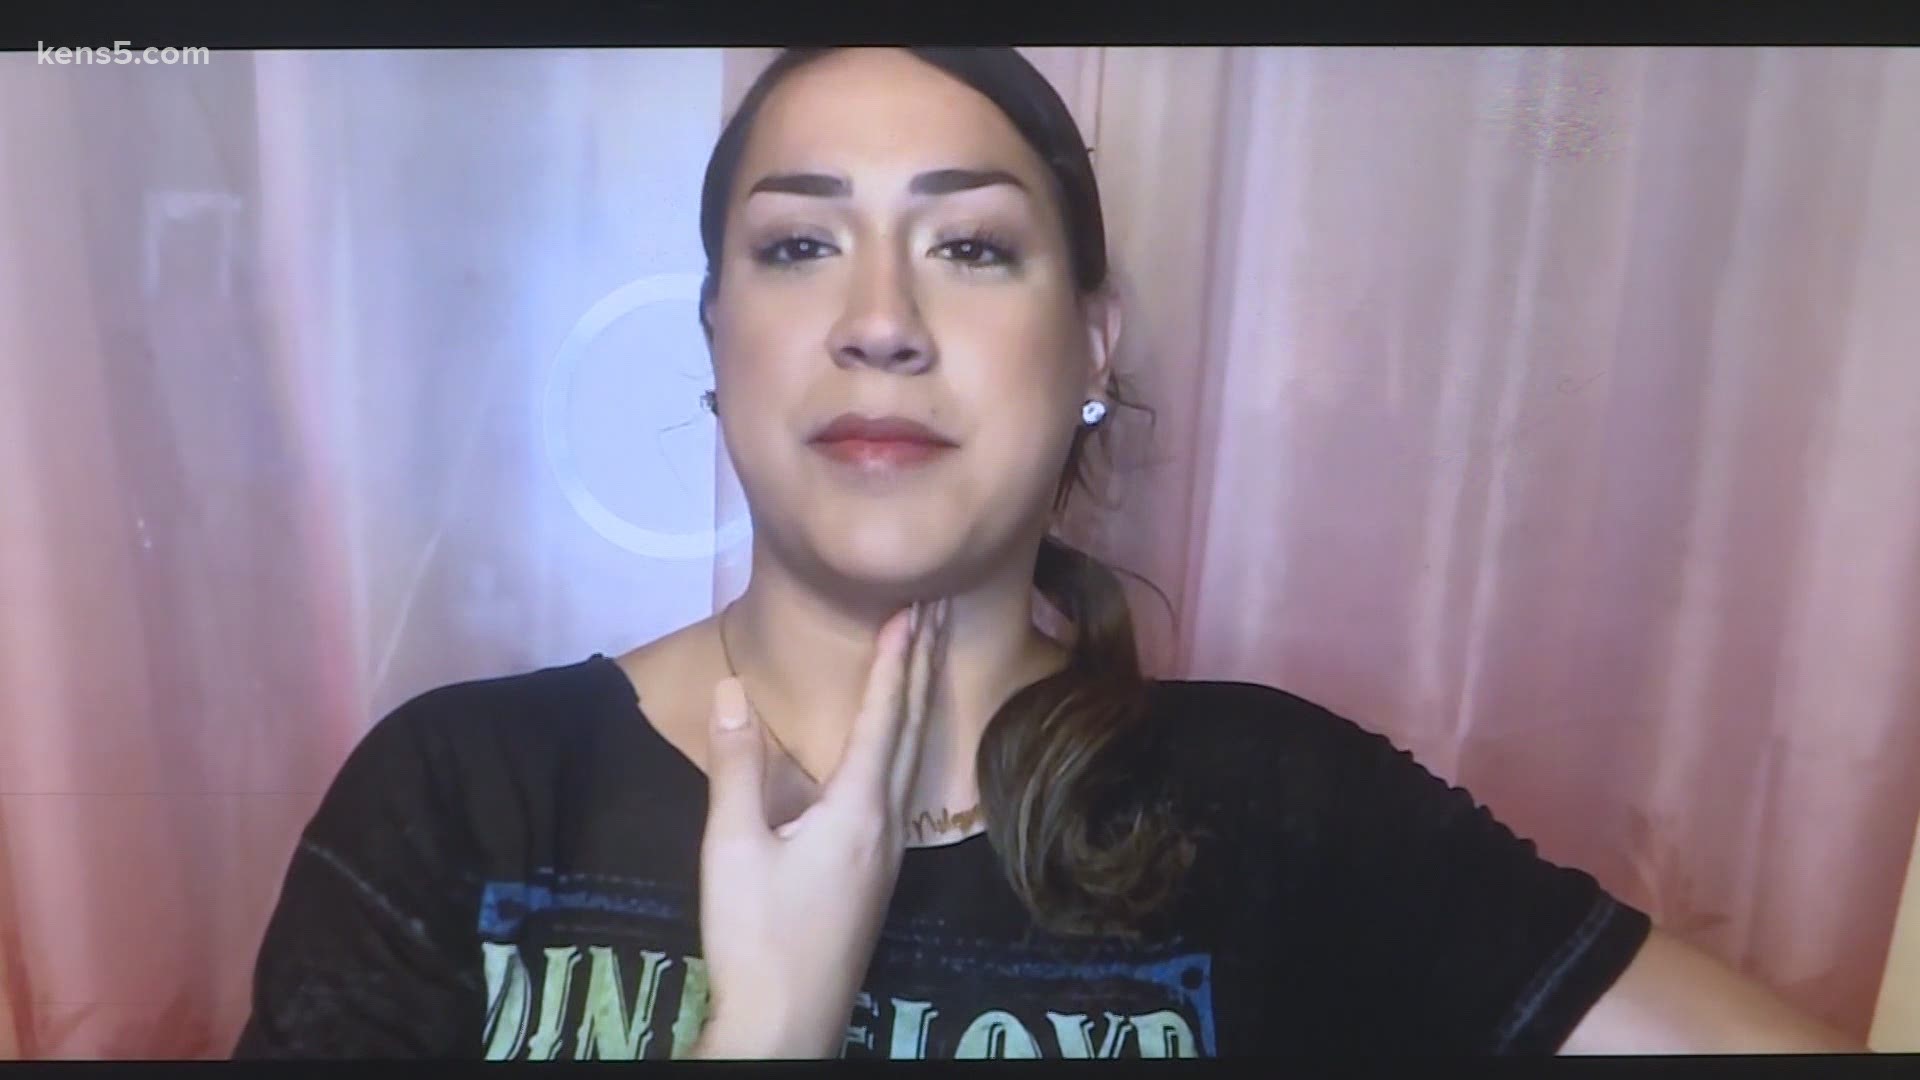 Trans woman says she was violated by bar security kens5